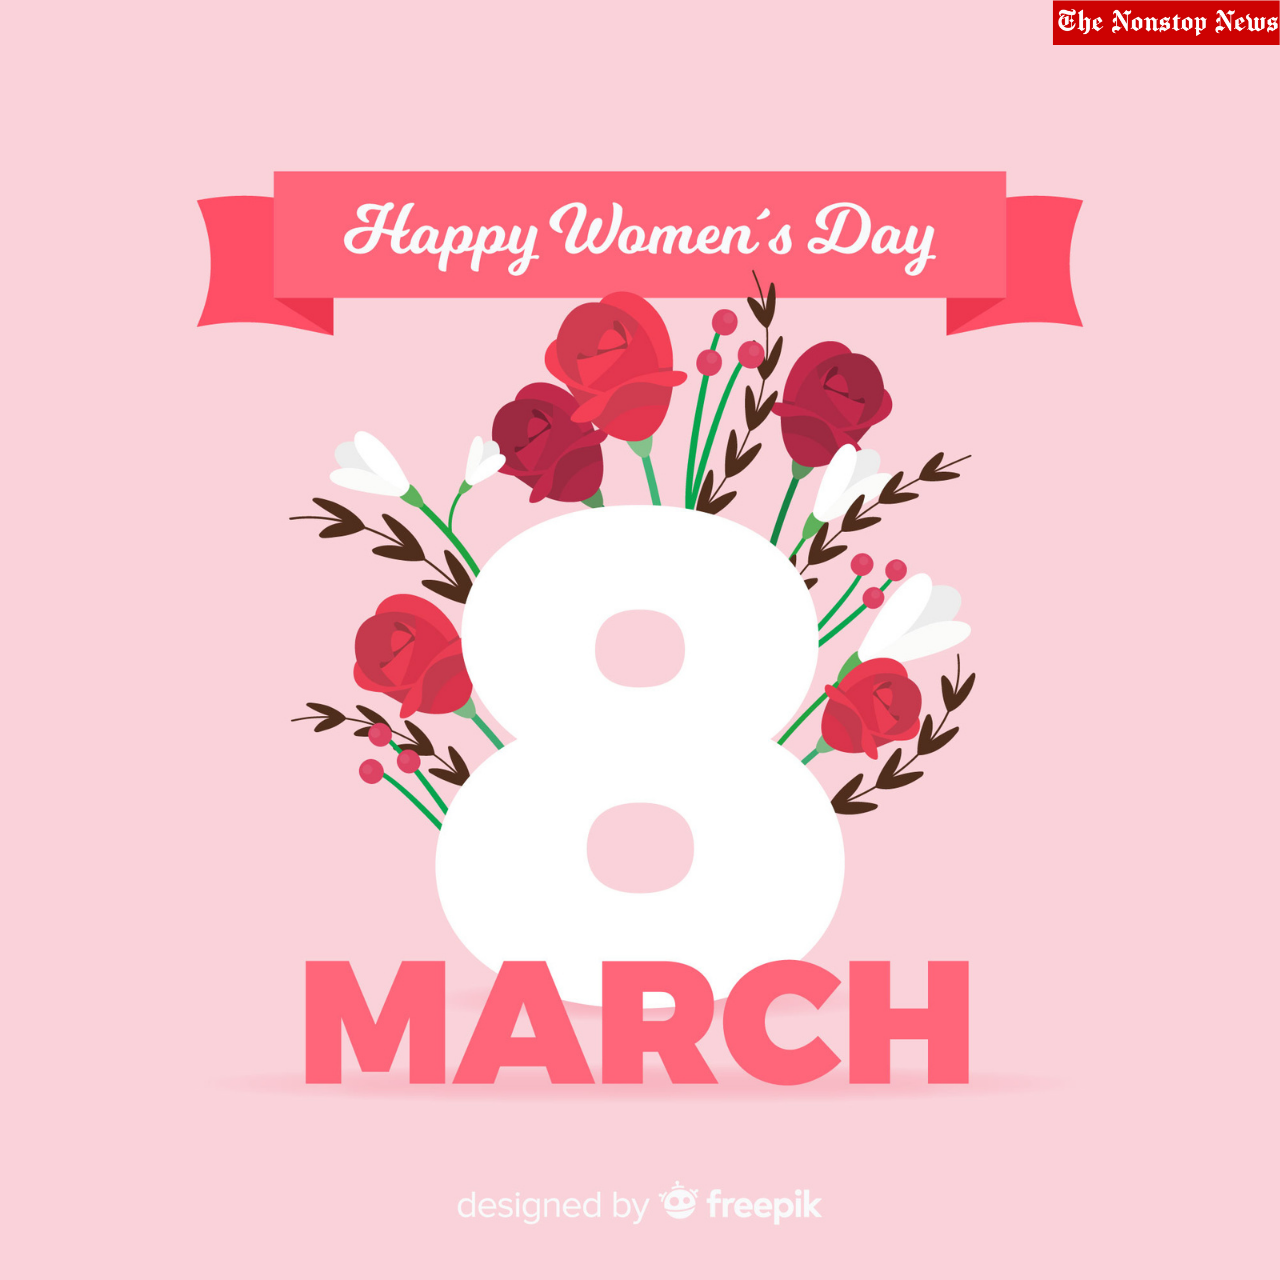 Happy Women's Day 2022 Quotes, Wishes, Greetings, HD Images, Messages from Company